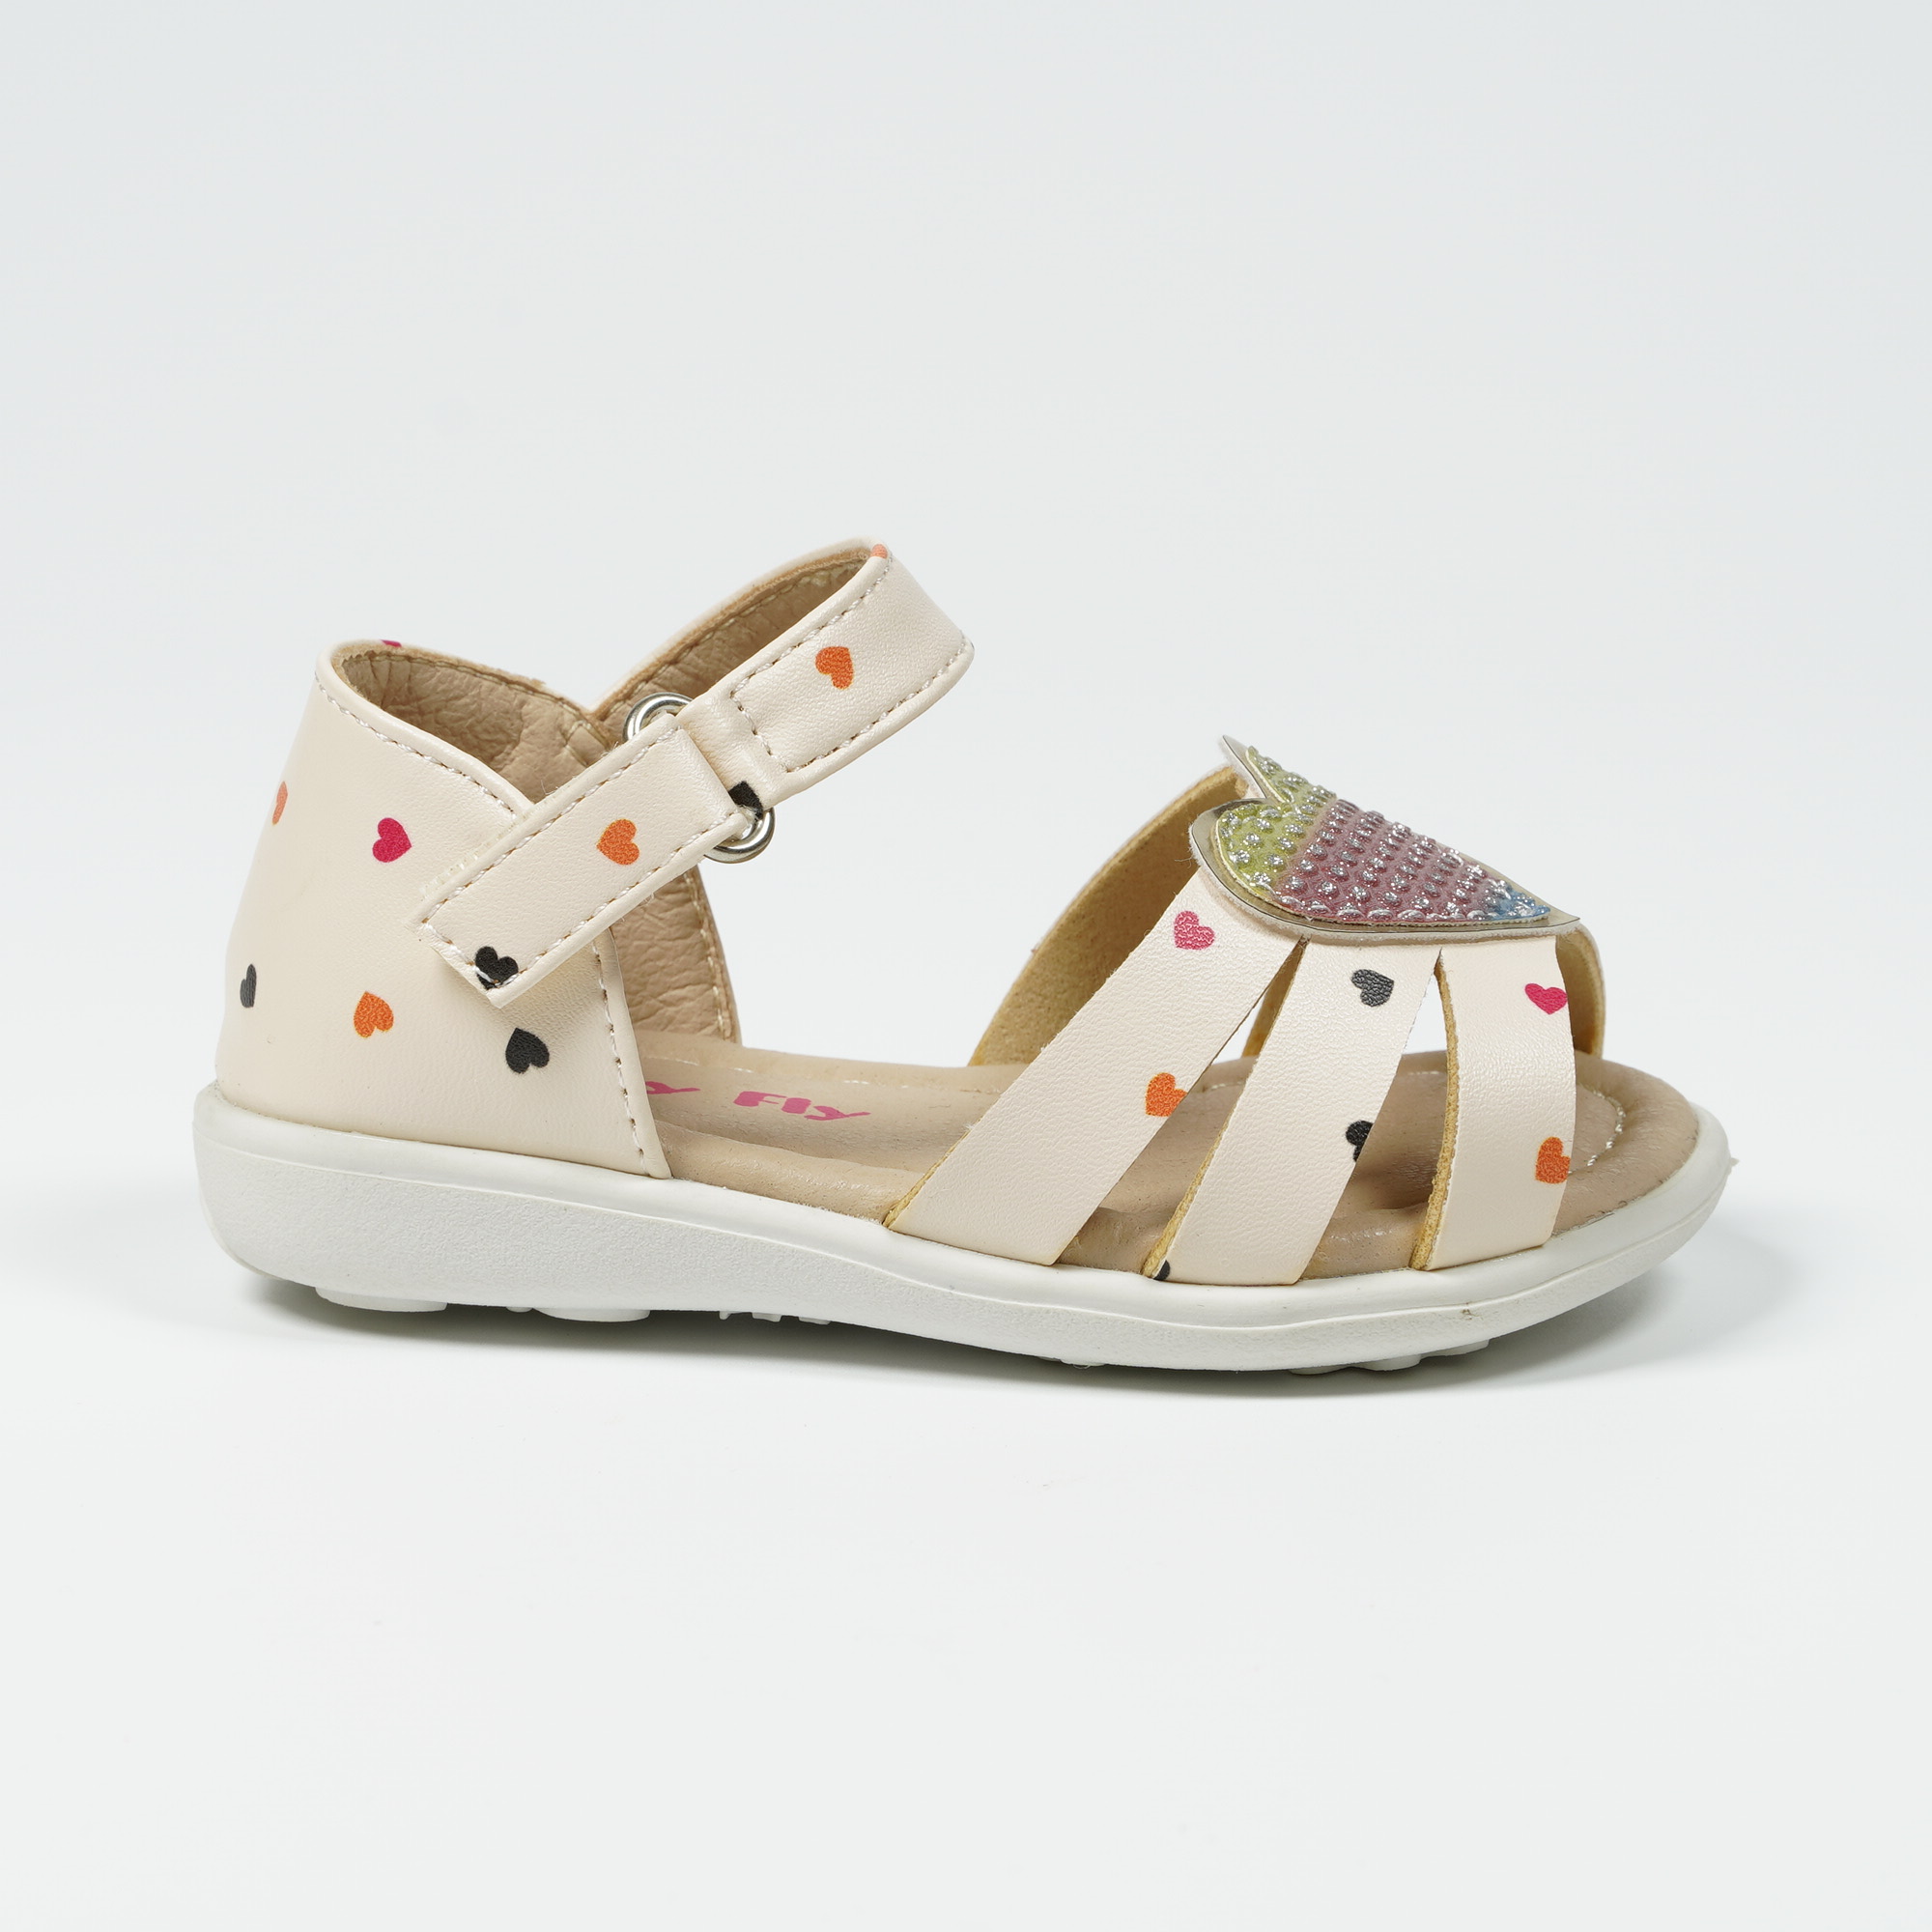 Cute-gradient-heart-shaped-spotted-Girls-Sandals-YDX0390H-1